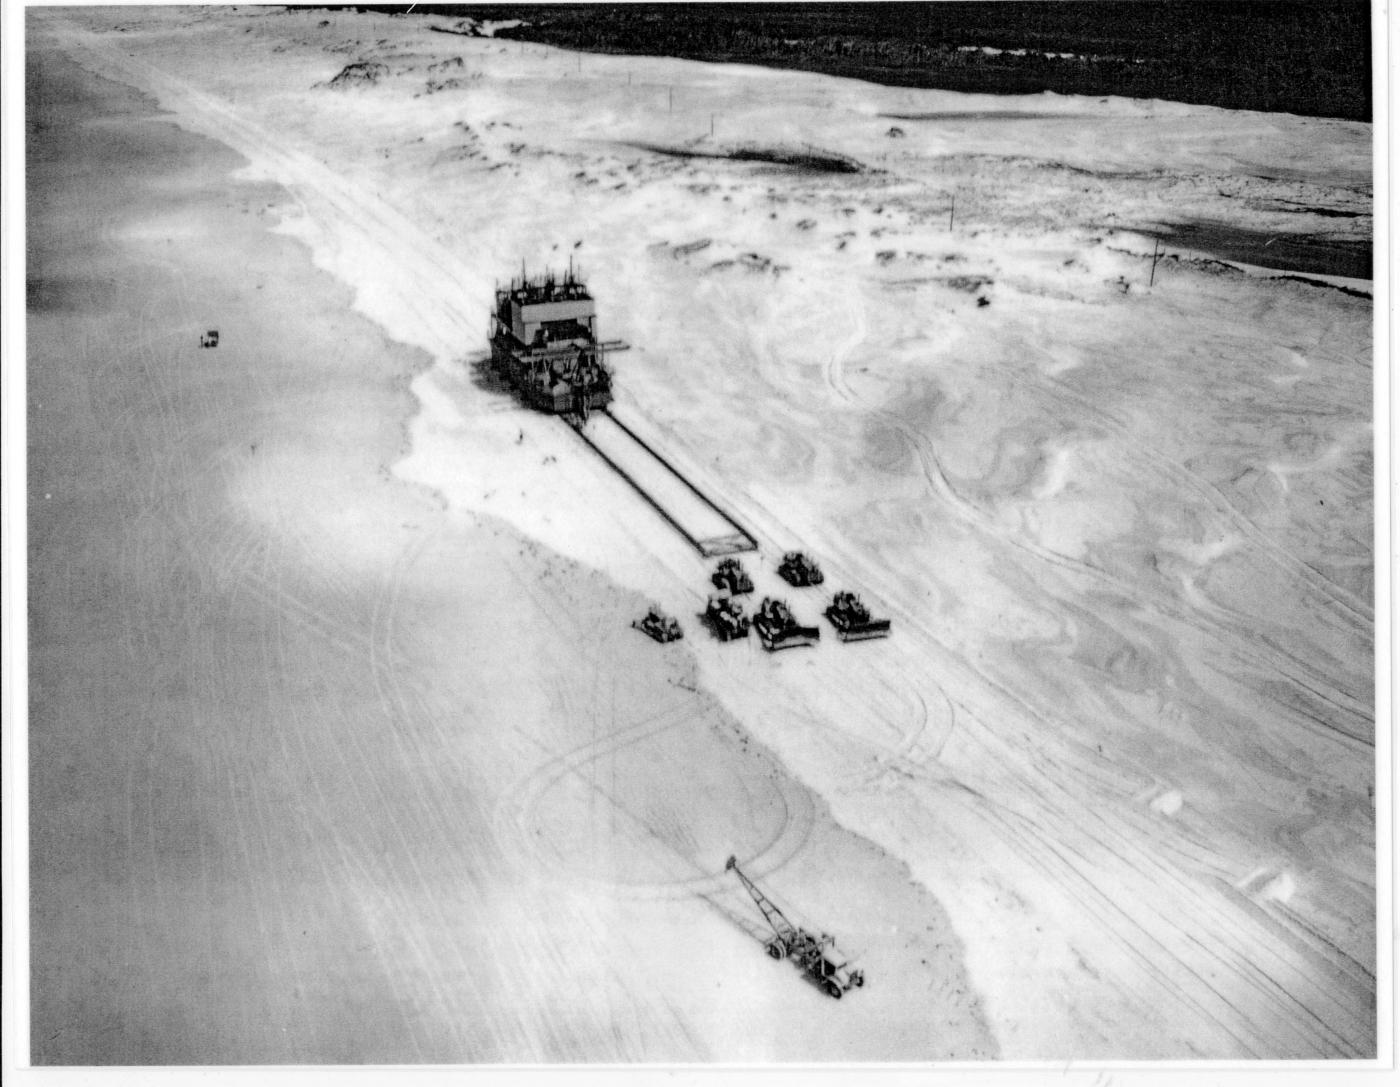 Moving a sandmining dredge along Main Beach on North Stradbroke Island, 1960s. Bulldozers are pulling the dredge, which is sliding on a constructed base.   Desc: Six bulldozers towing a mining dredge along a beach just above high tide mark. Beyond the sand dune is vegetation and an area of fresh water. The dunes are criss-crossed with tyre marks. 